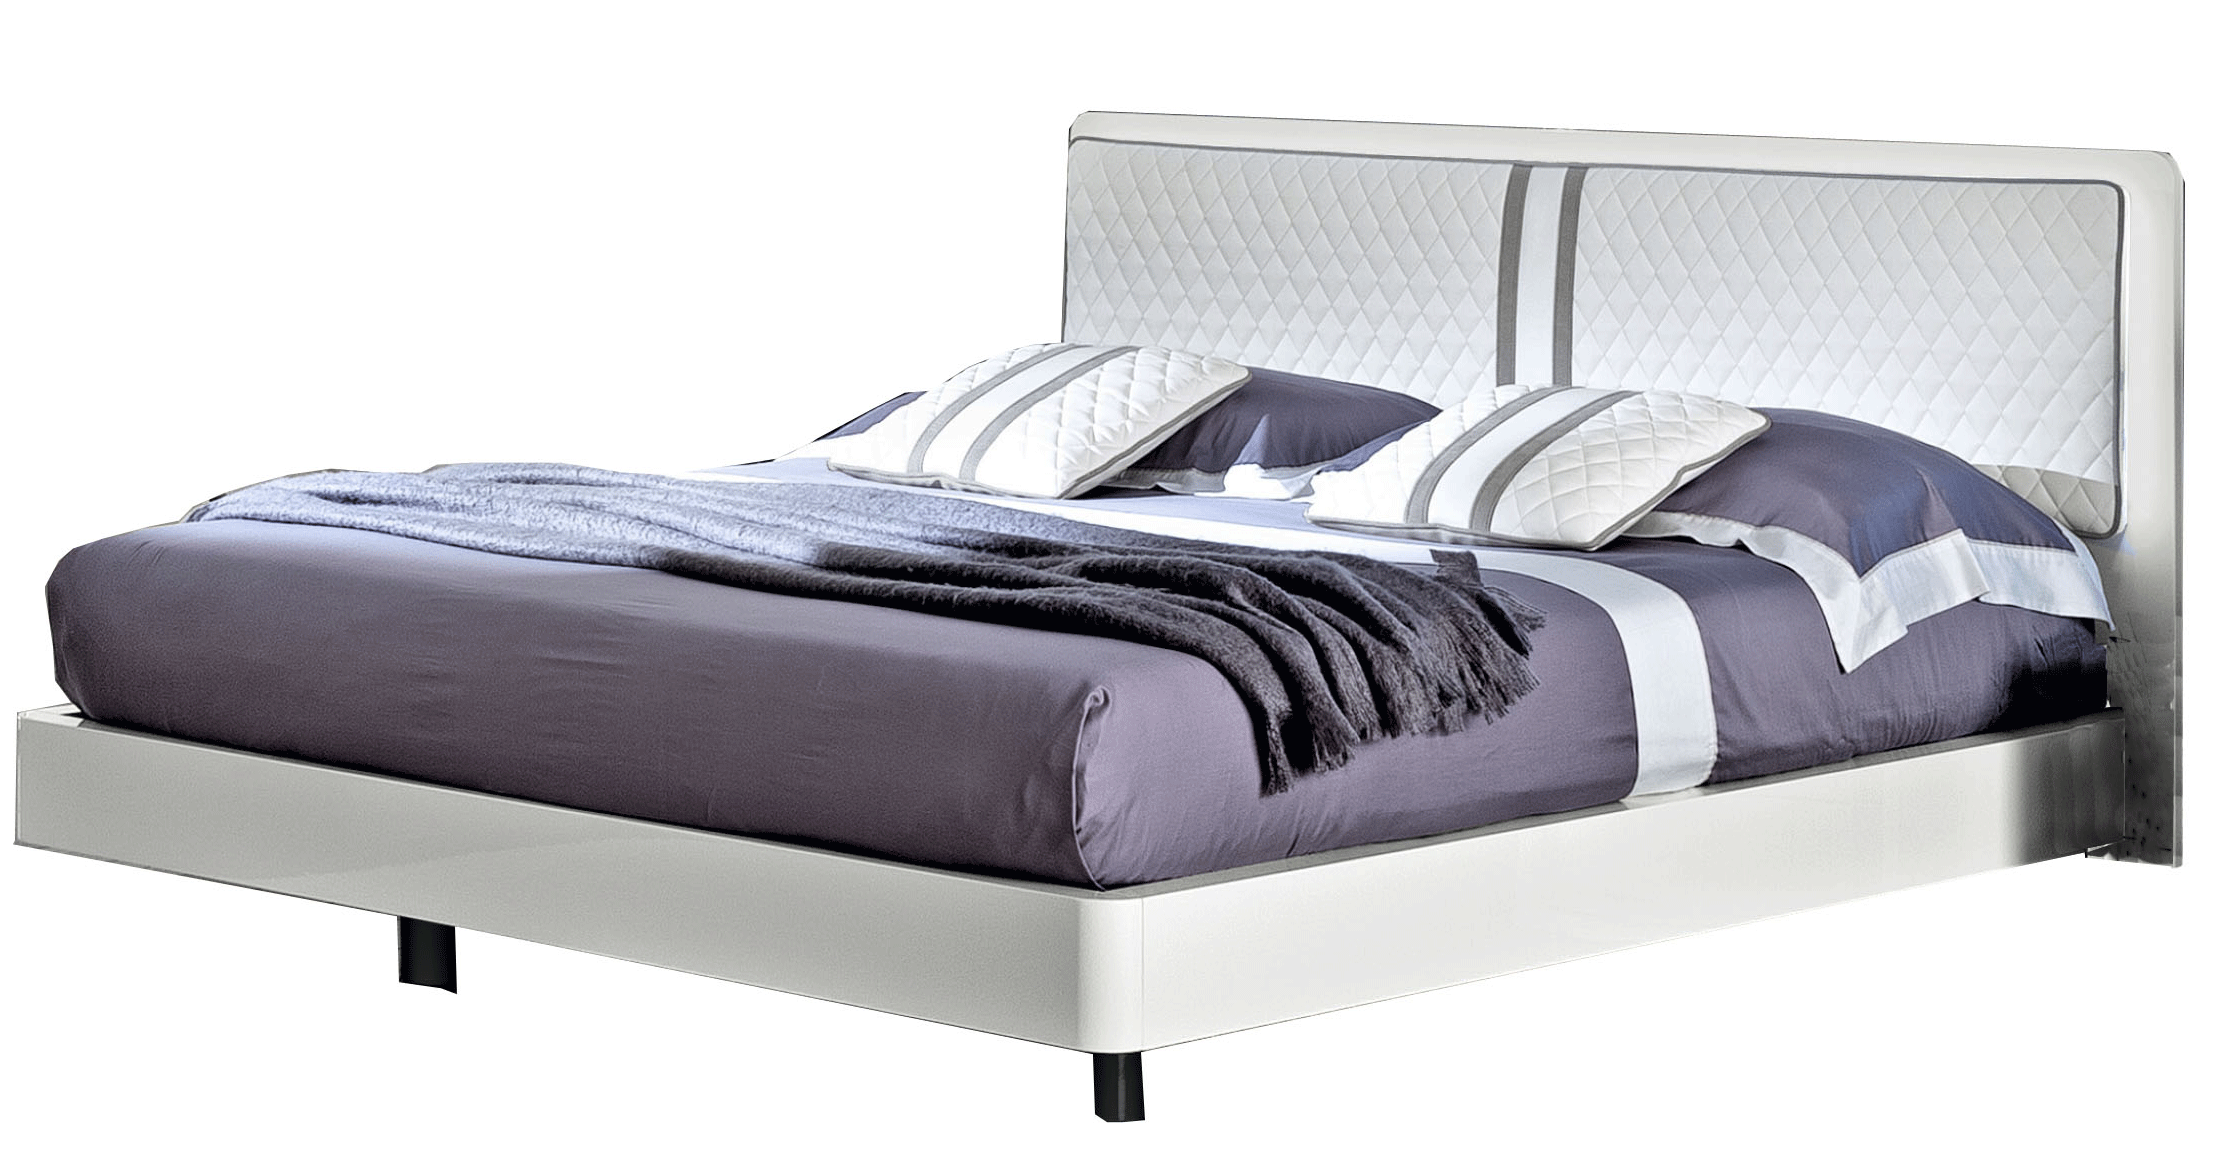 Brands Camel Gold Collection, Italy Dama Bianca Bed